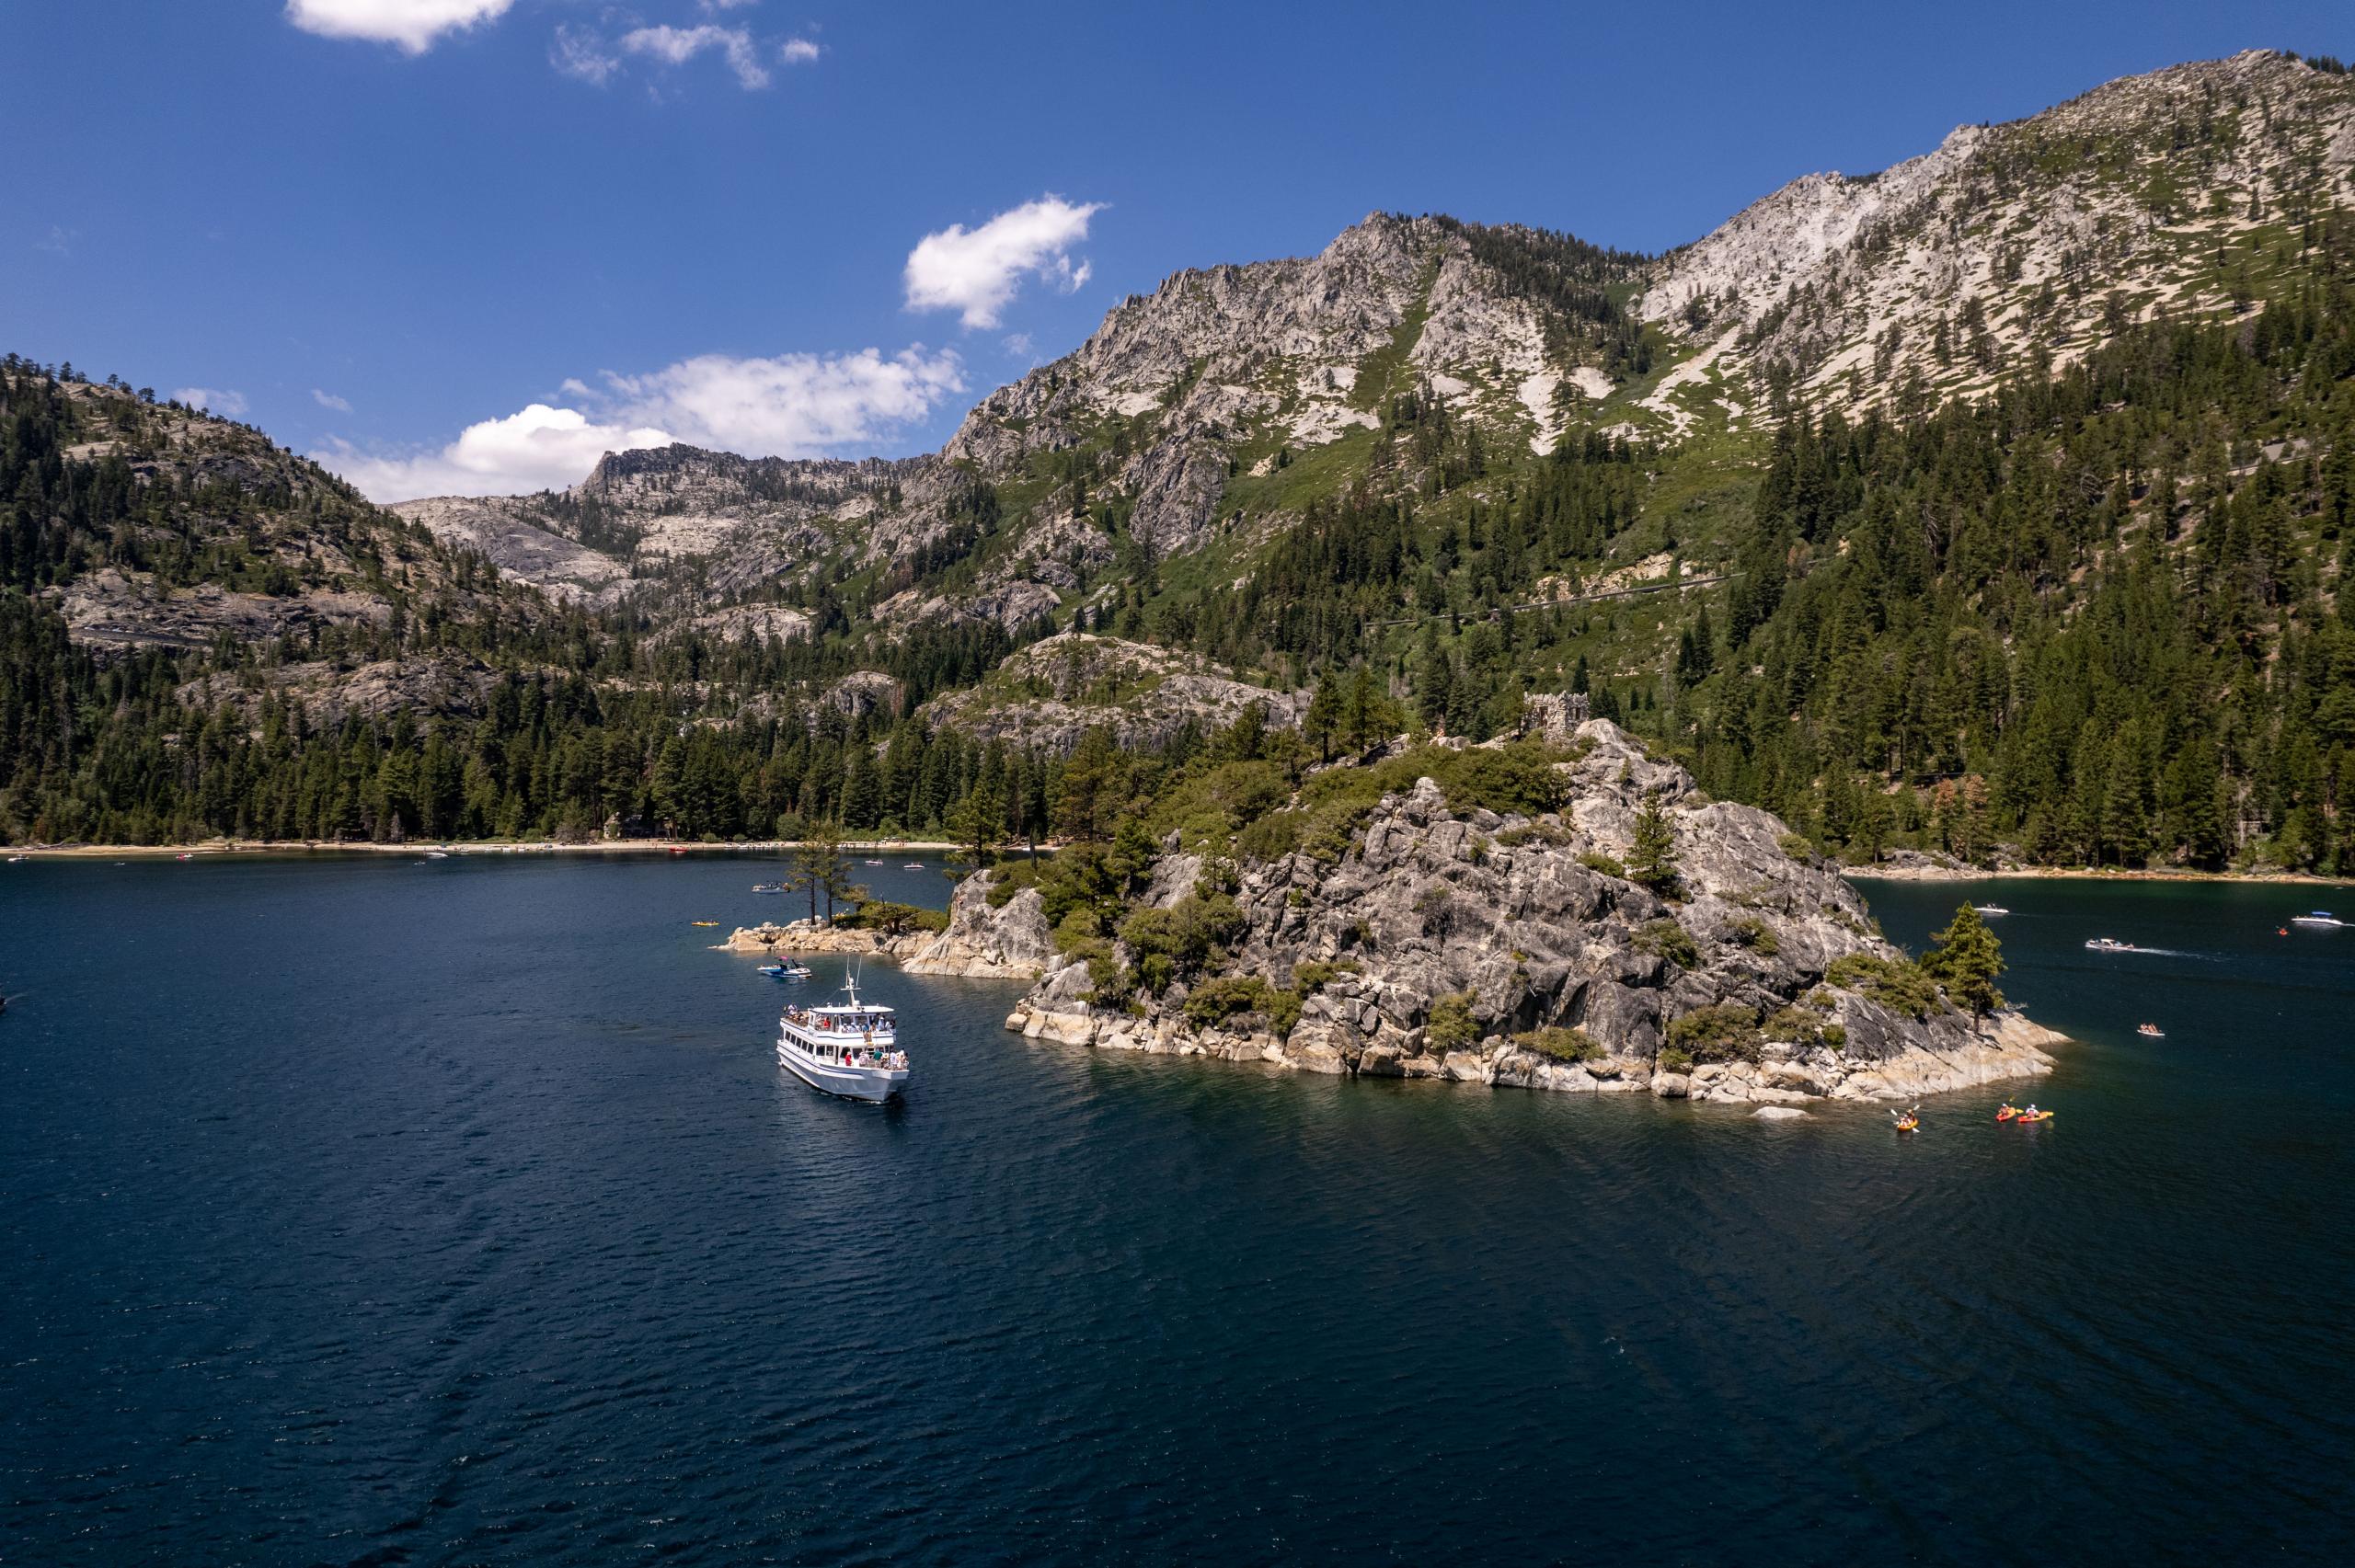 Lake Tahoe & Emerald Bay Cruises Are The Ideal Scenic Water Experience